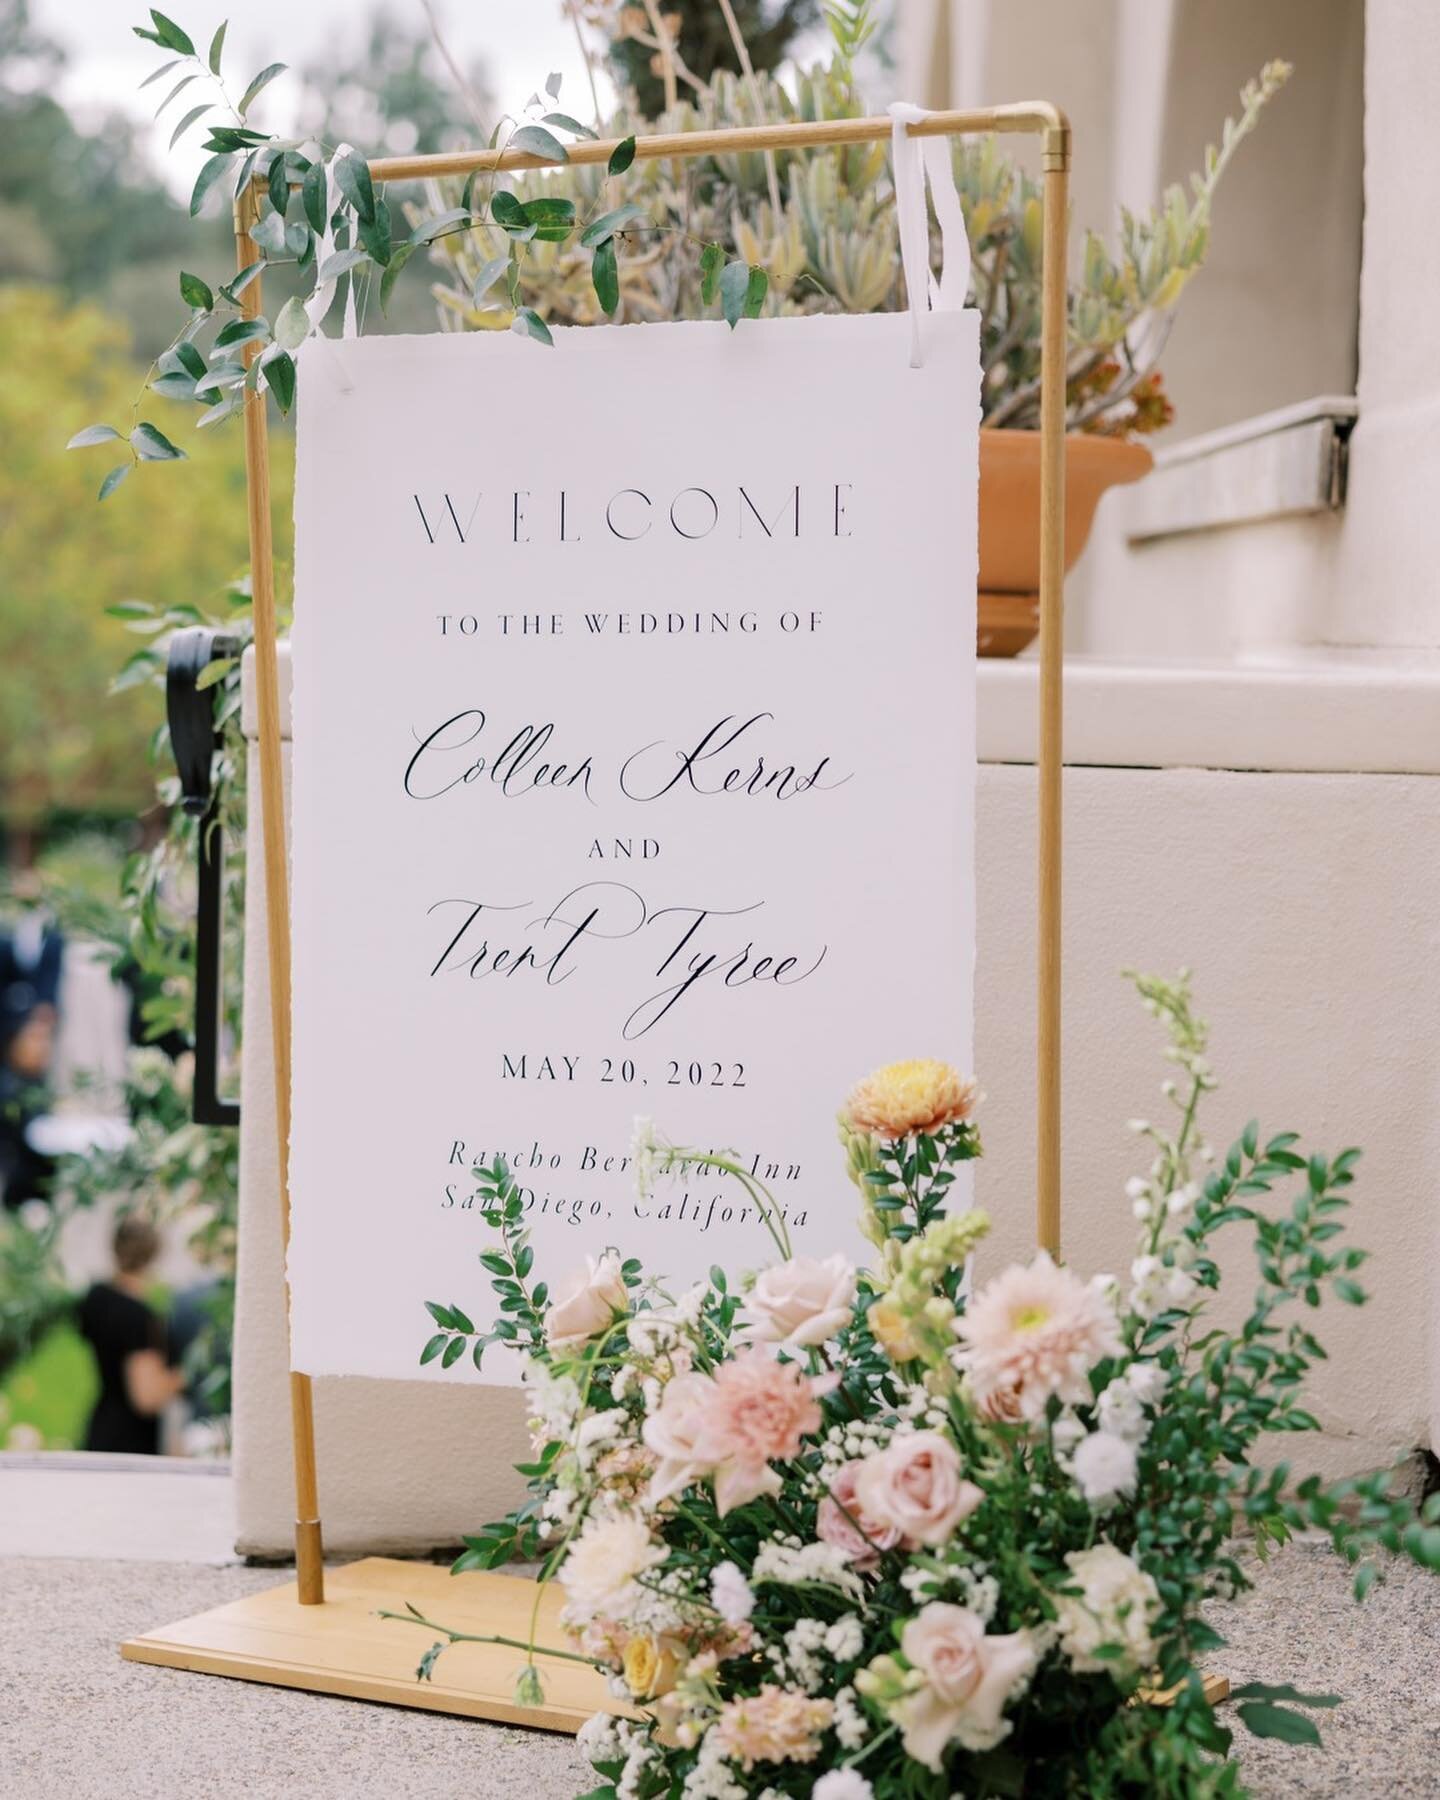 Still not over this beautiful day! 🥰

Swipe ⬅️ to see the flip from ceremony to reception! 

Planning+Design | @blissfullystyledca
Photo | @jennyquicksall
Video | @perfectunionfilms
Florals | @lilyrodenfloralstudio
Venue | @ranchobernardoinn
Rentals